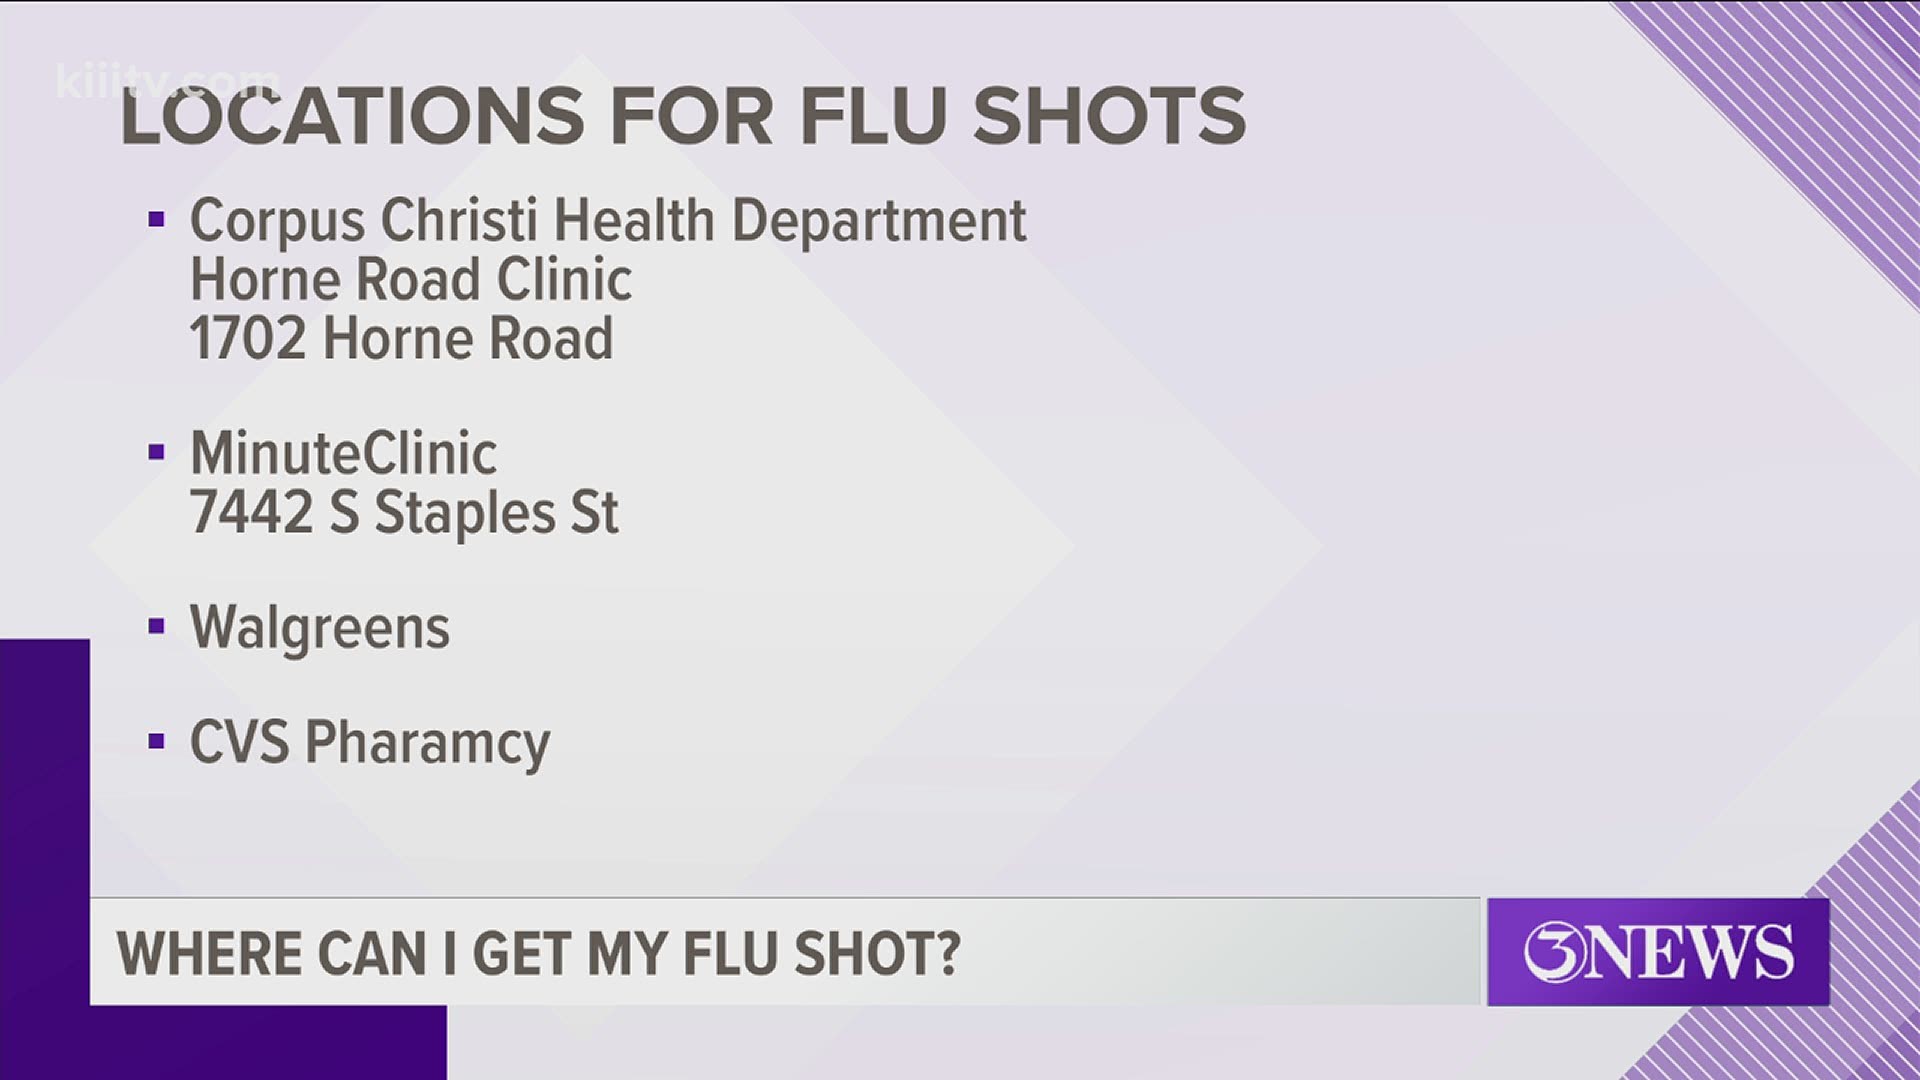 If you are looking to get a flu shot here are just some locations where you can get your vaccination.